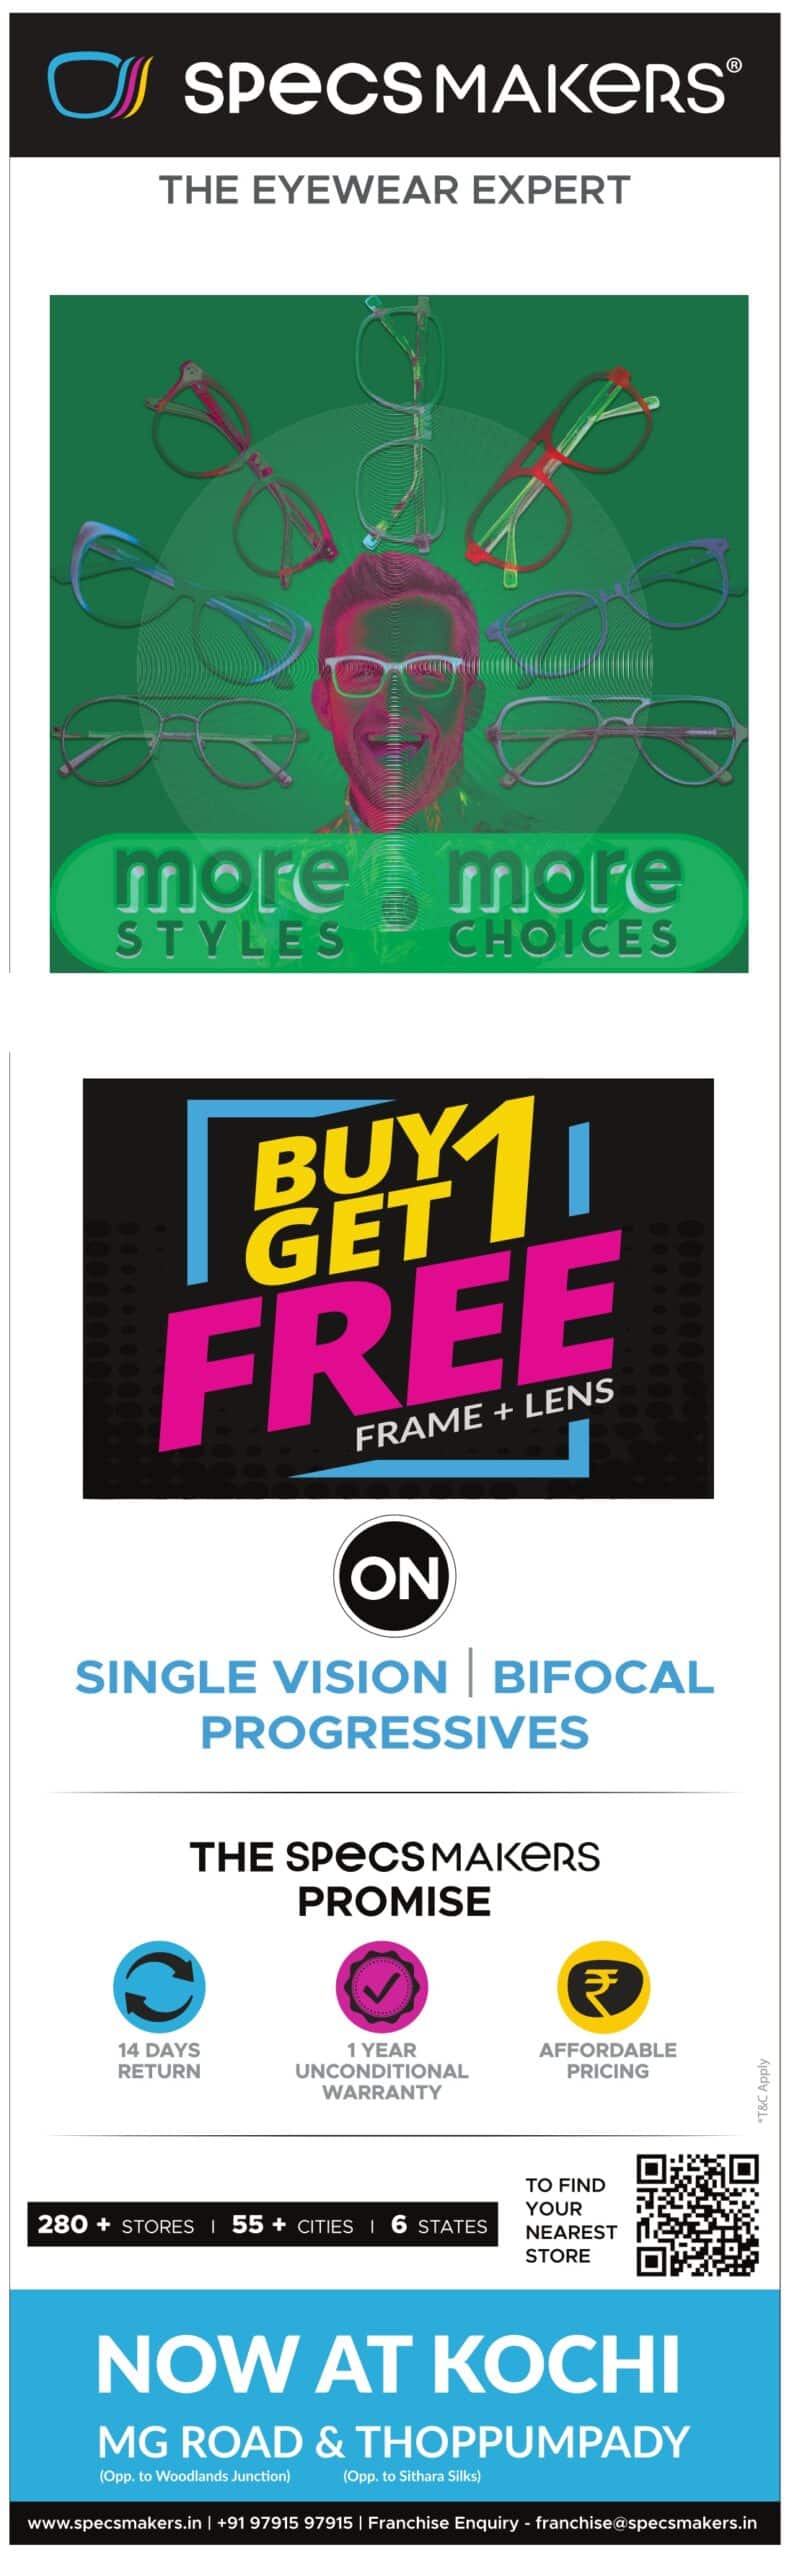 Specsmakers Buy 1 Get 1 FREE offer